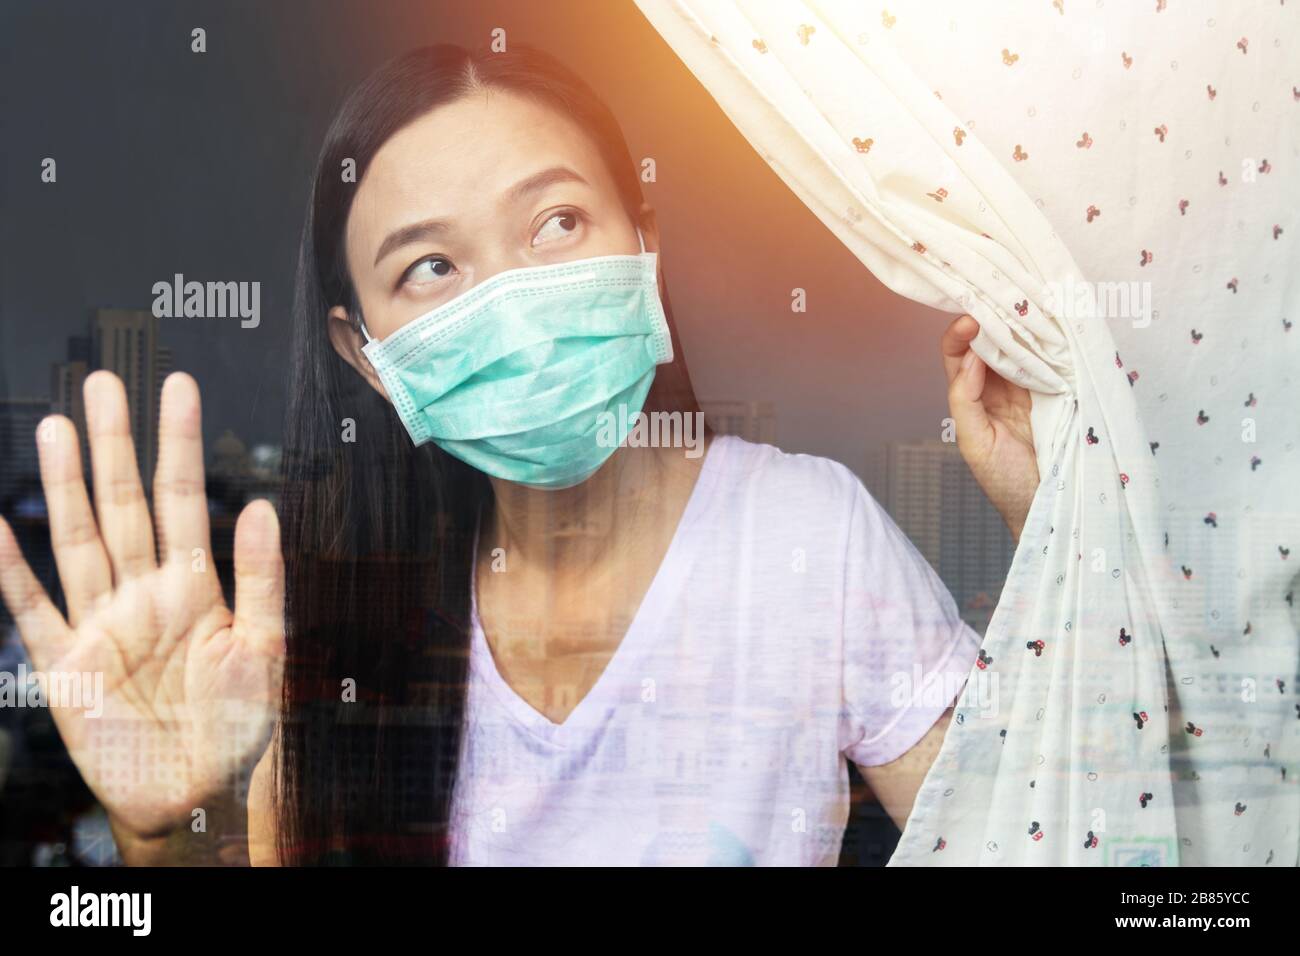 home quarantine concept. woman at risk of being infected with the Coronavirus stay isolation at home for self quarantine, prevention spreading of germ Stock Photo